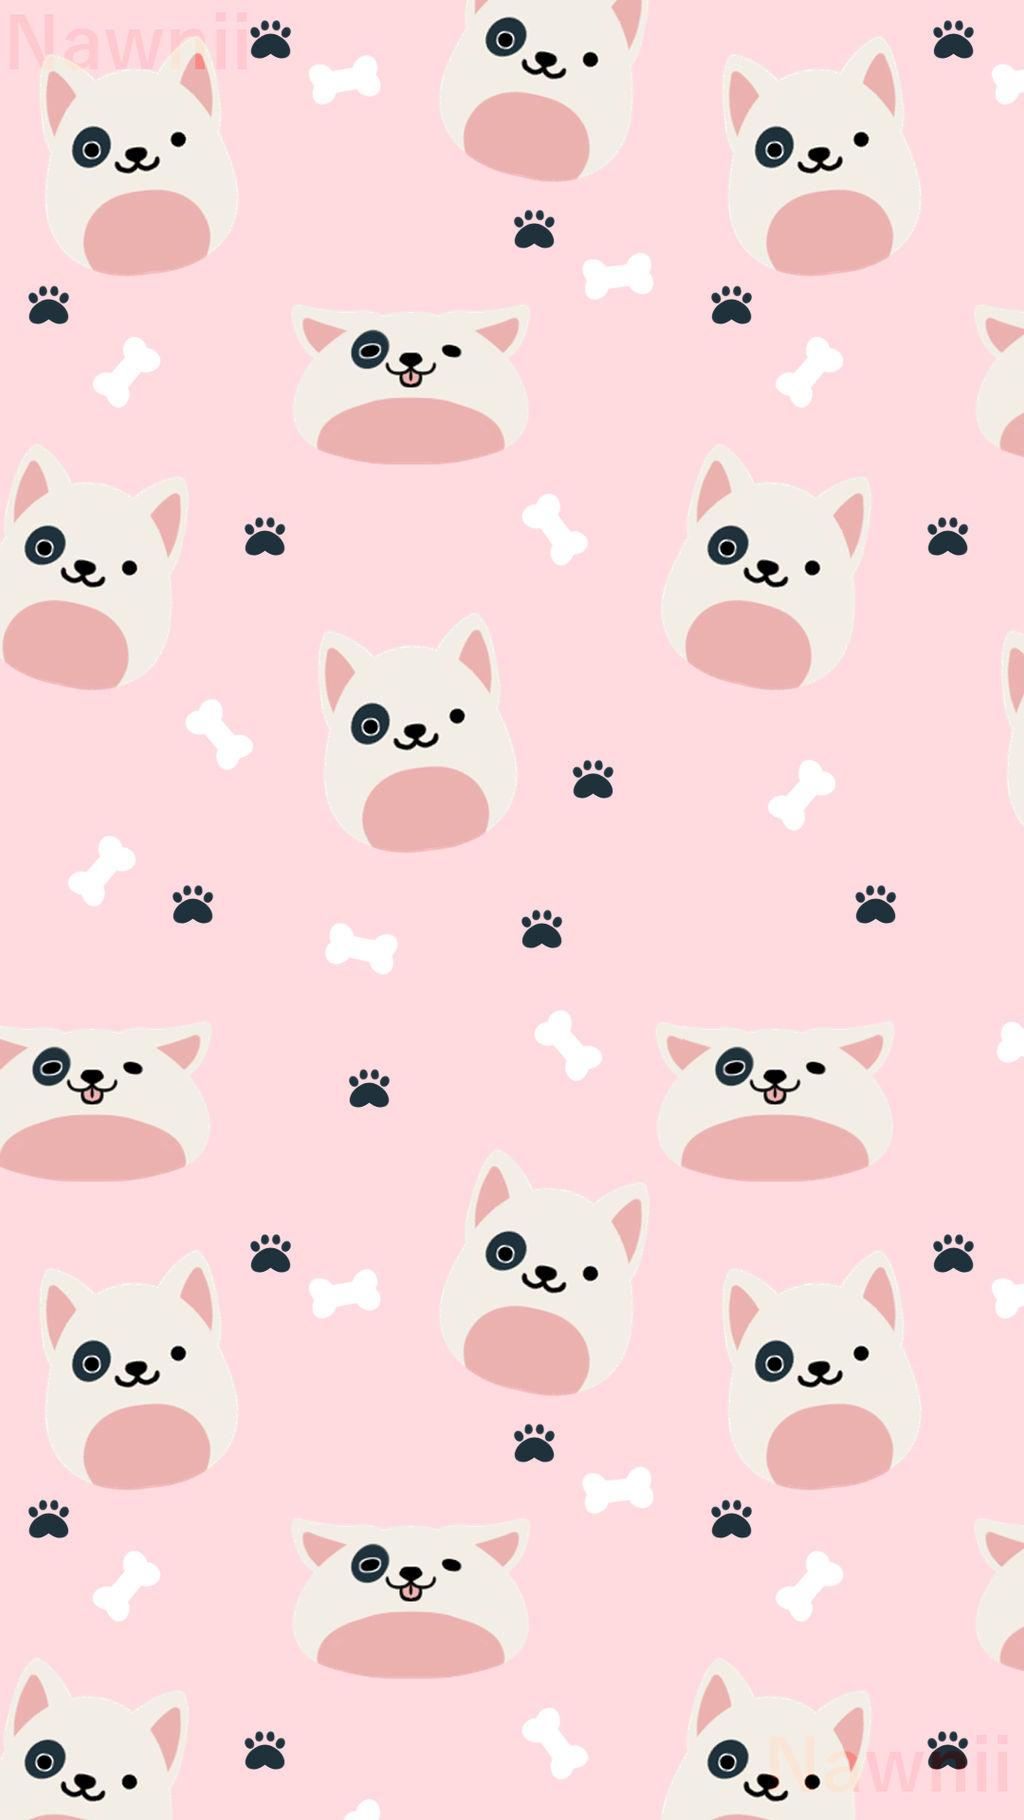 Charlie Squishmallow Wallpaper by Nawnii on